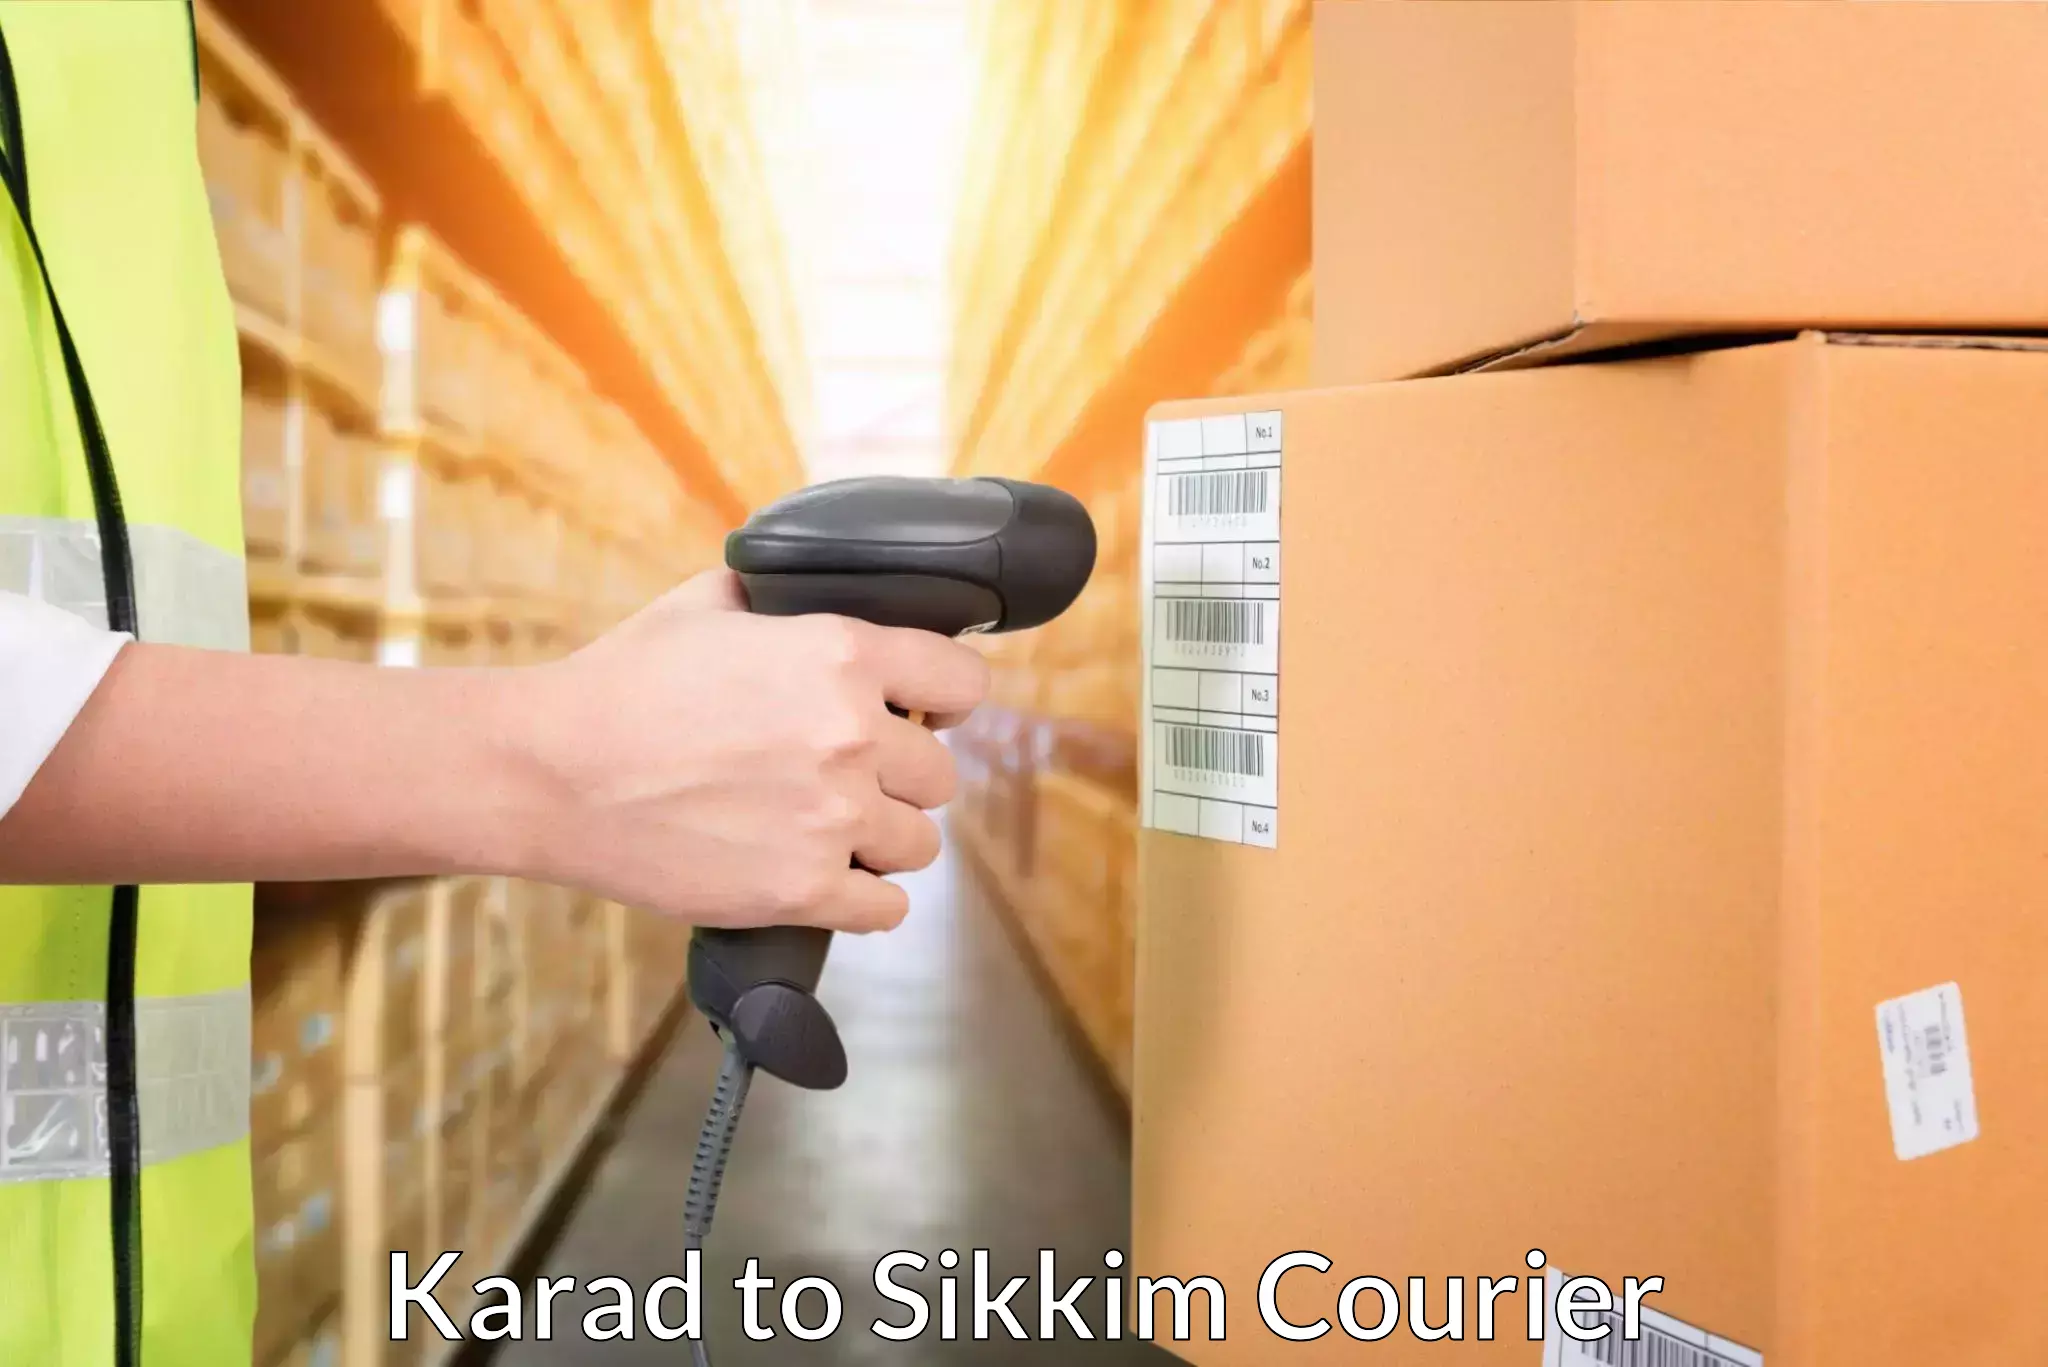 Online shipping calculator in Karad to Pelling